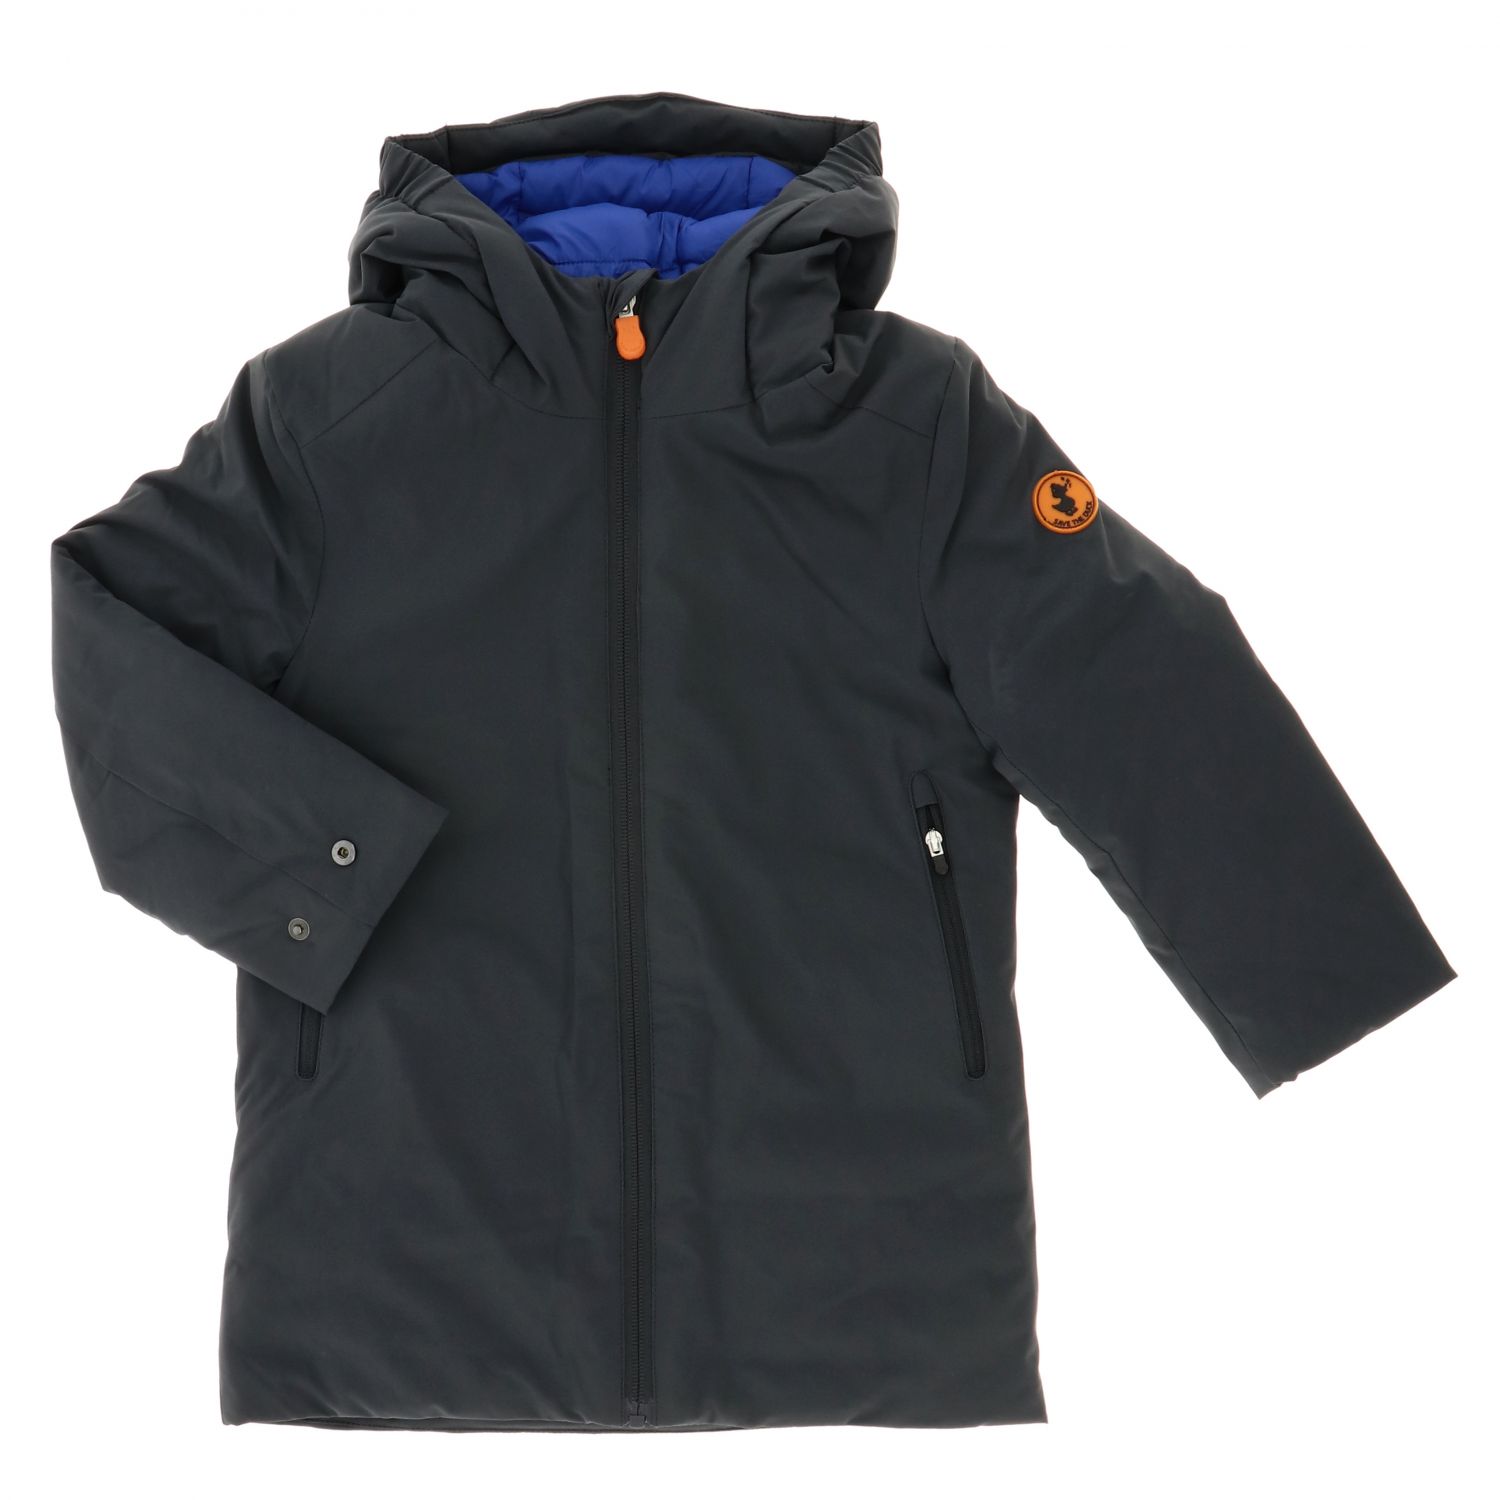 Save The Duck Outlet: Coat kids - Grey | Coat Save The Duck J4298U ...